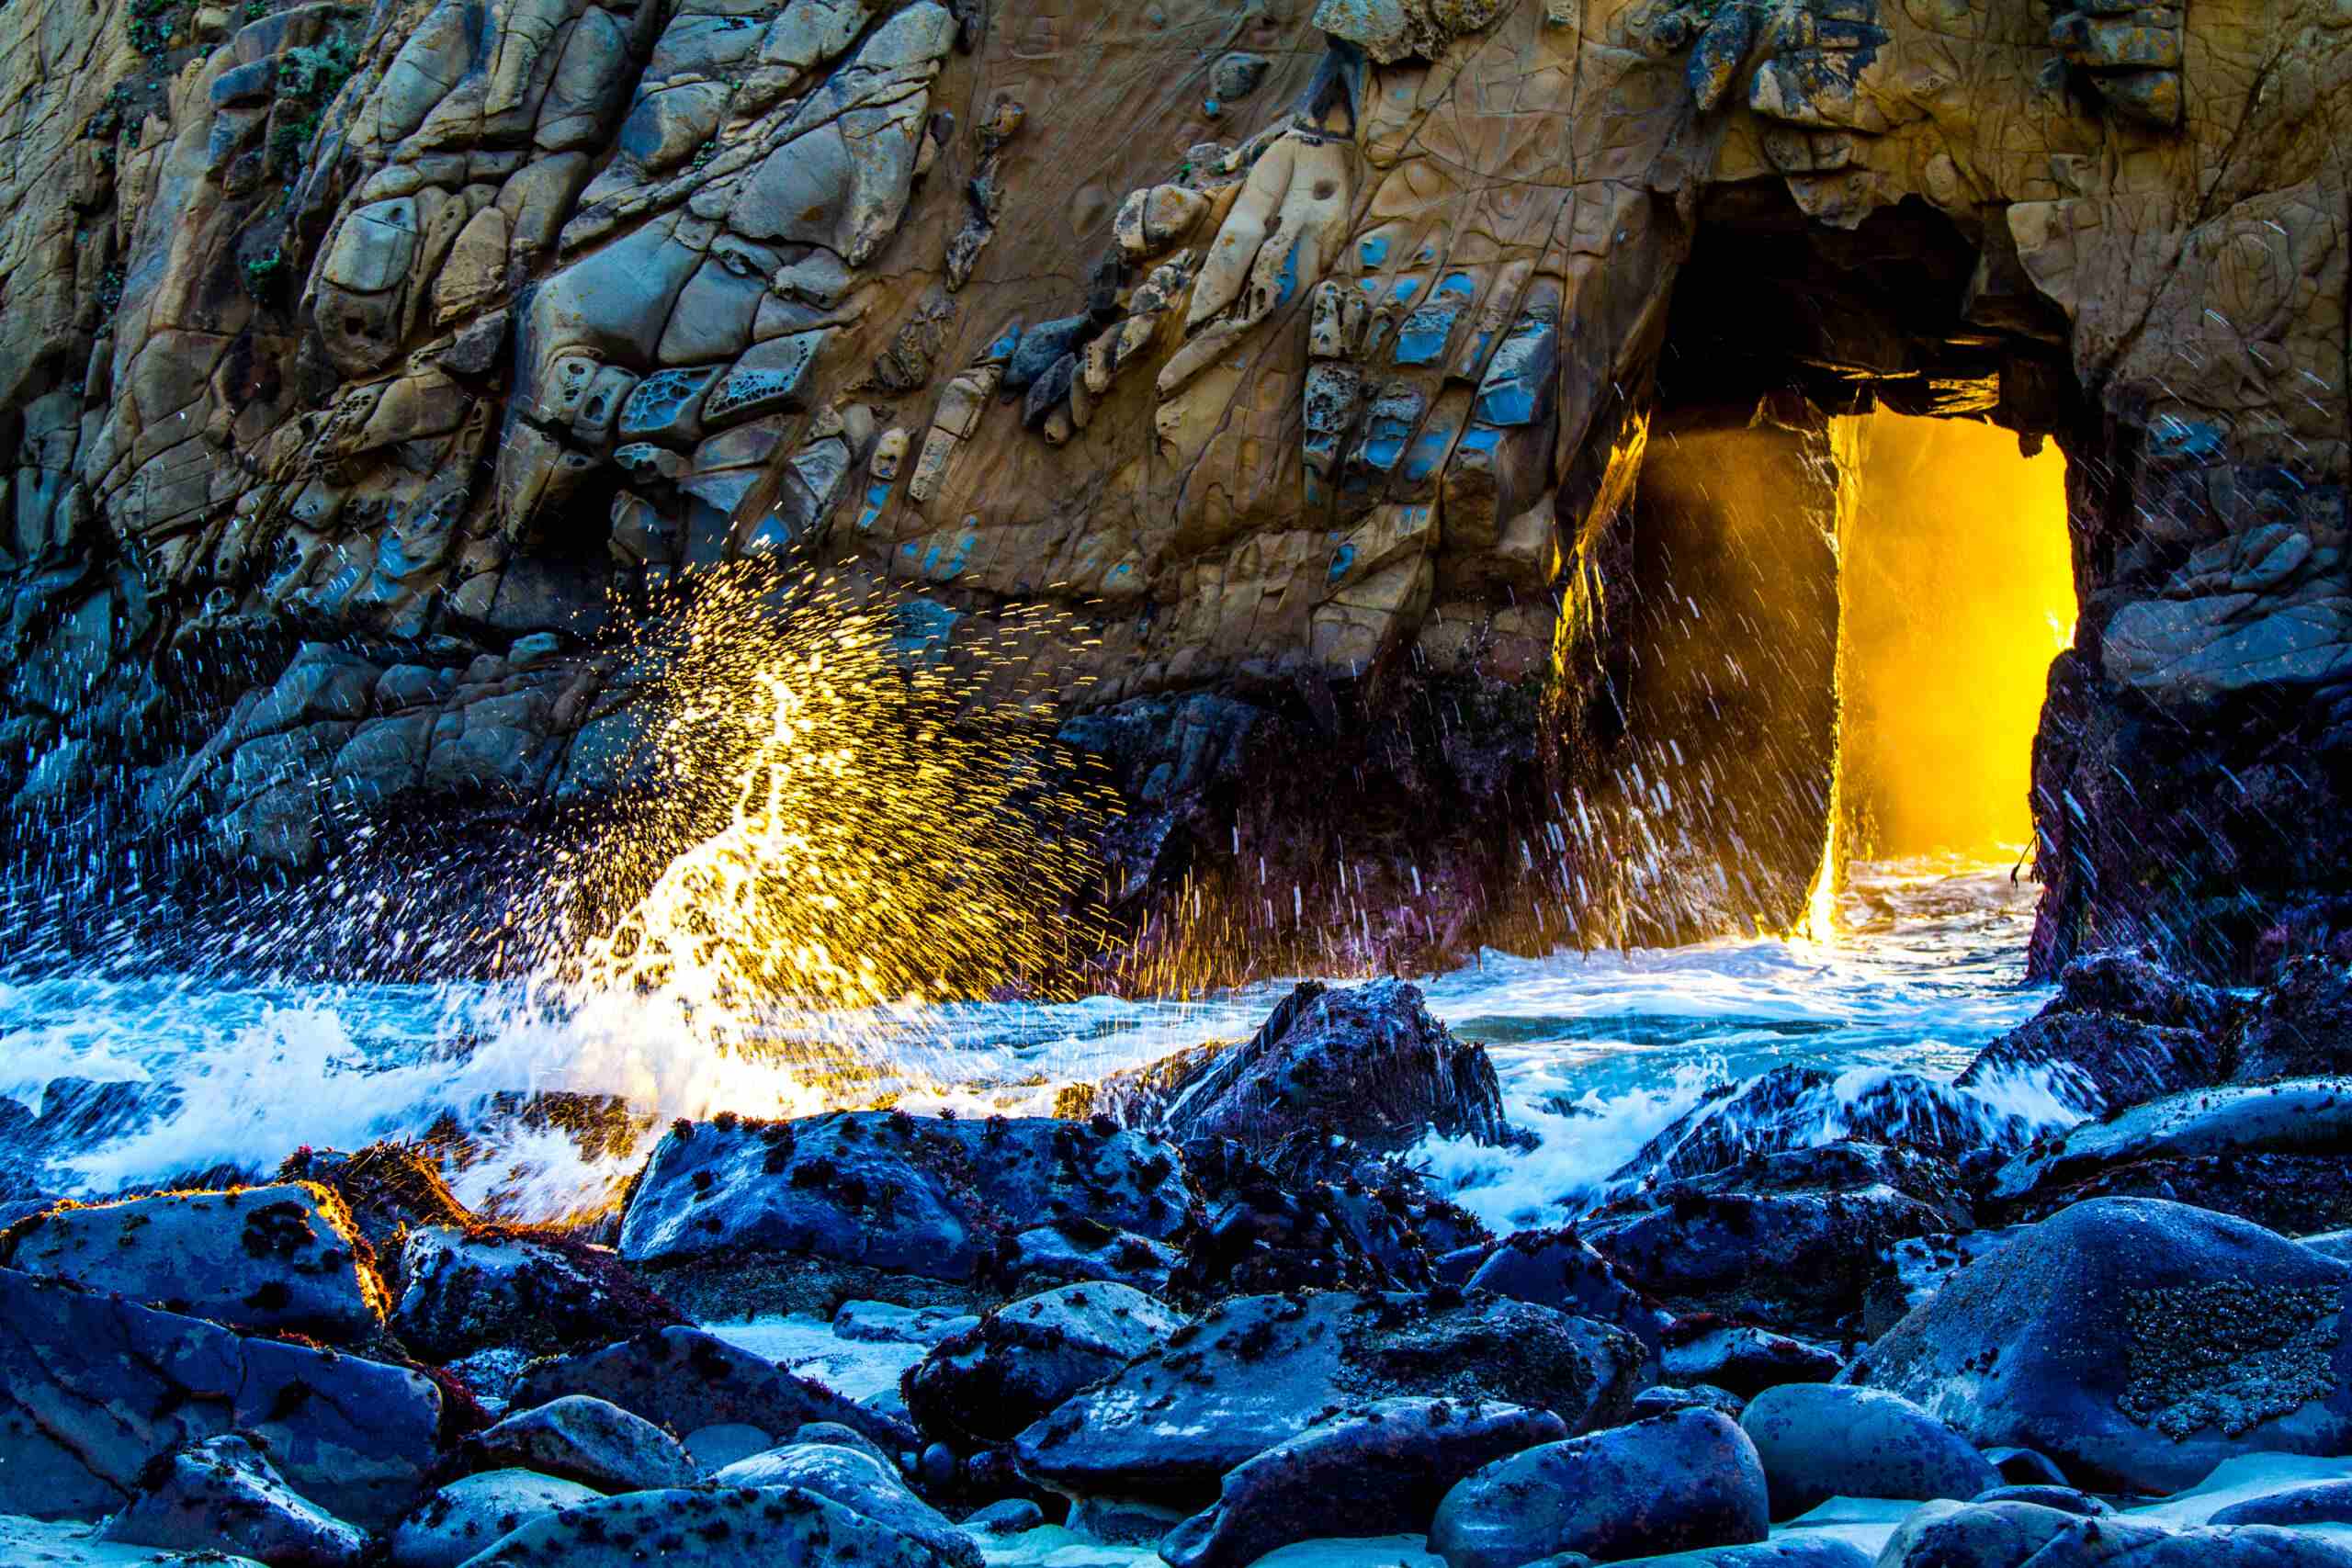 An artwork of a cave beside the shores